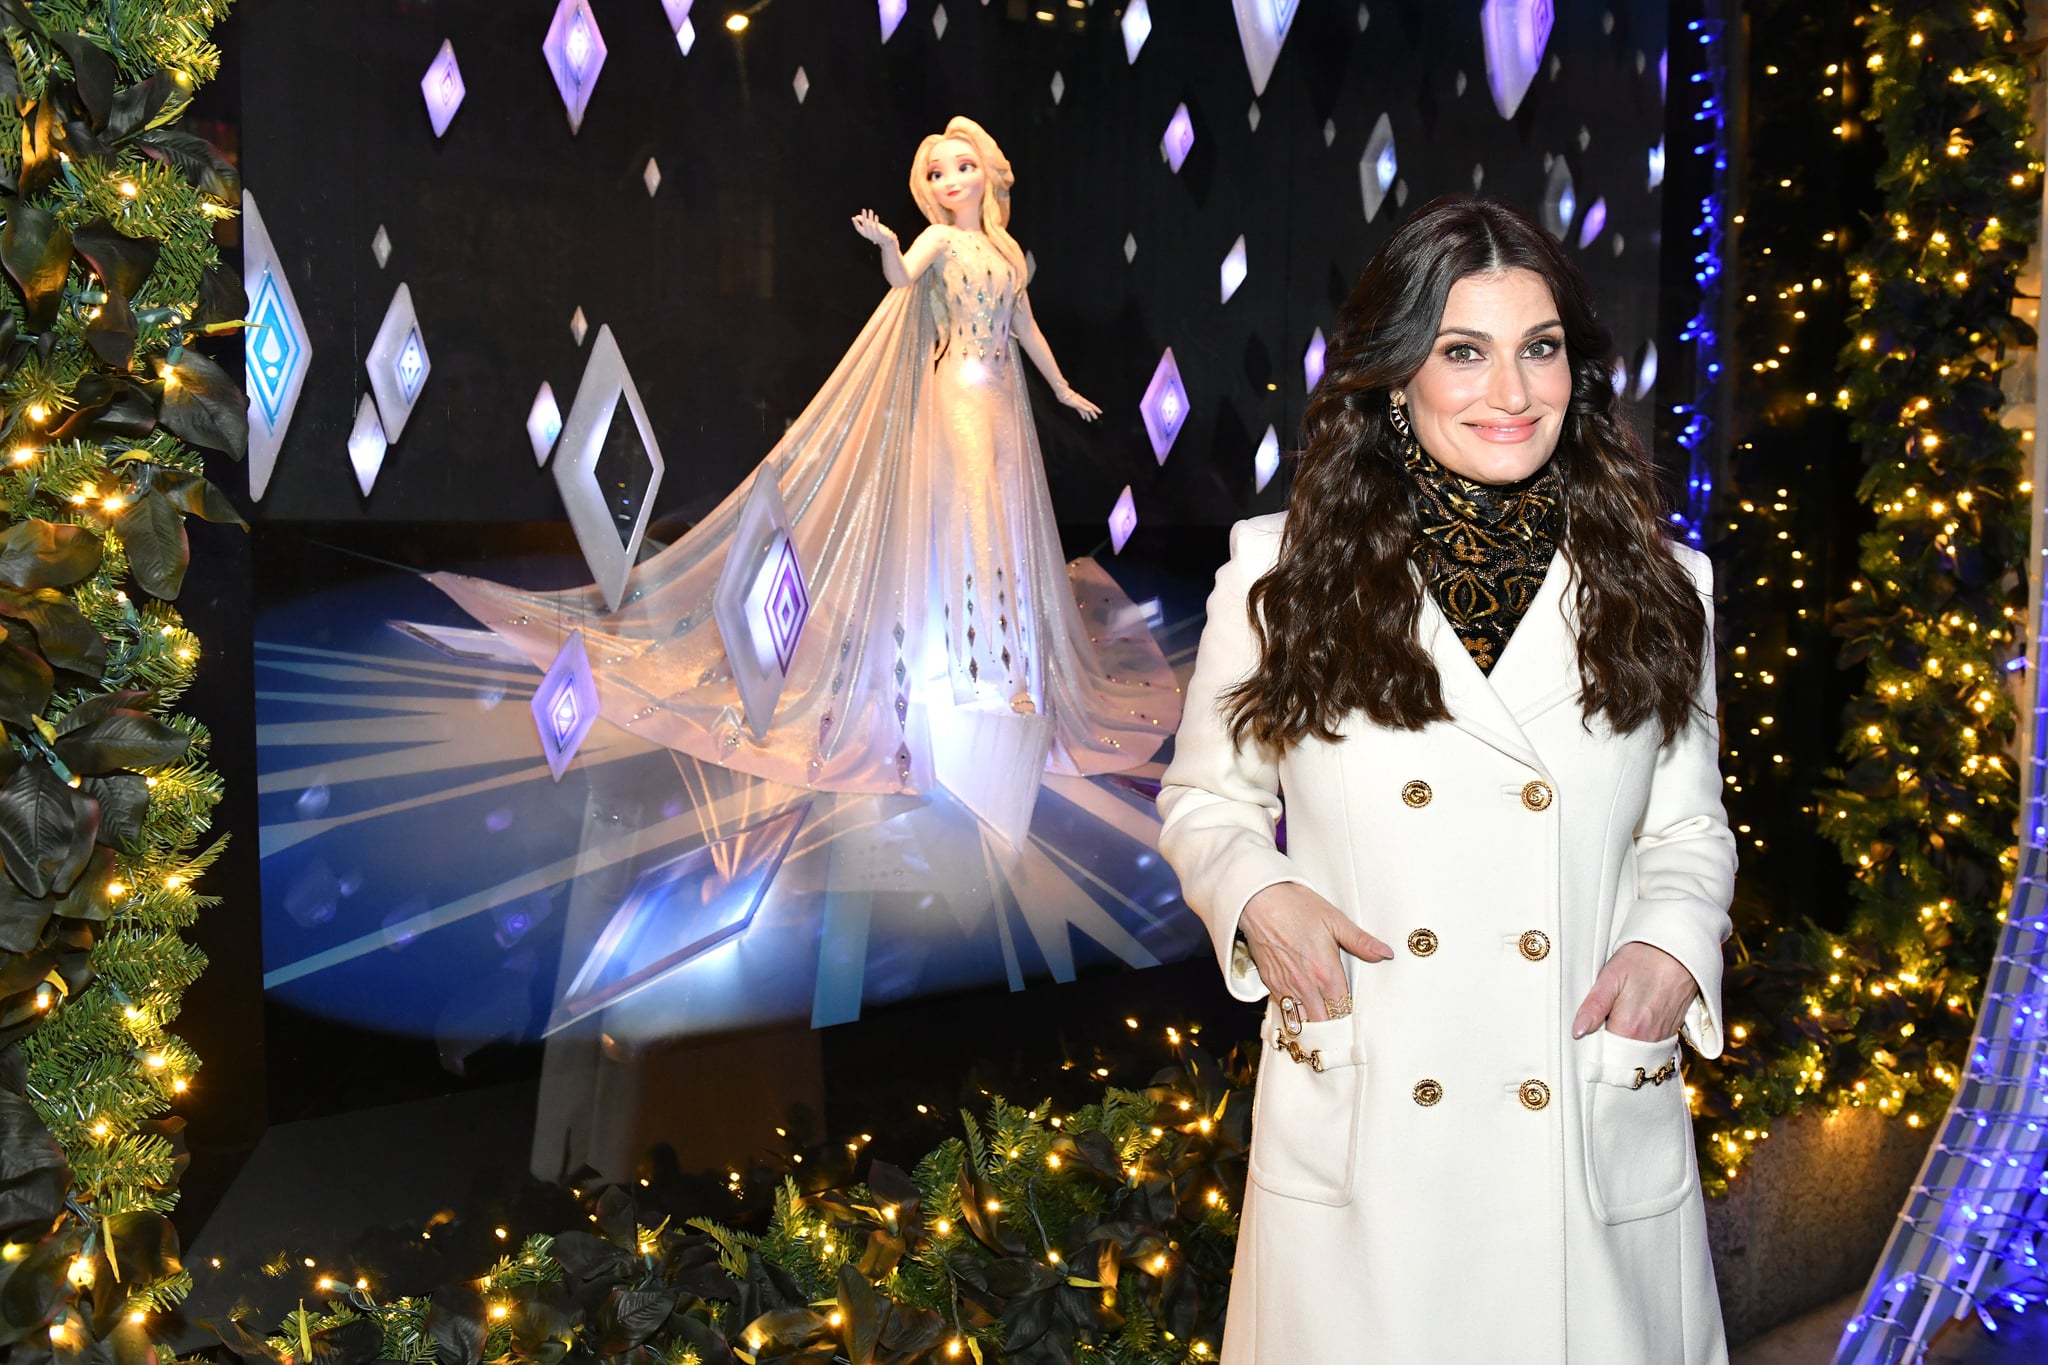  Idina Menzel poses during the Disney and Saks Fifth Avenue unveiling of 